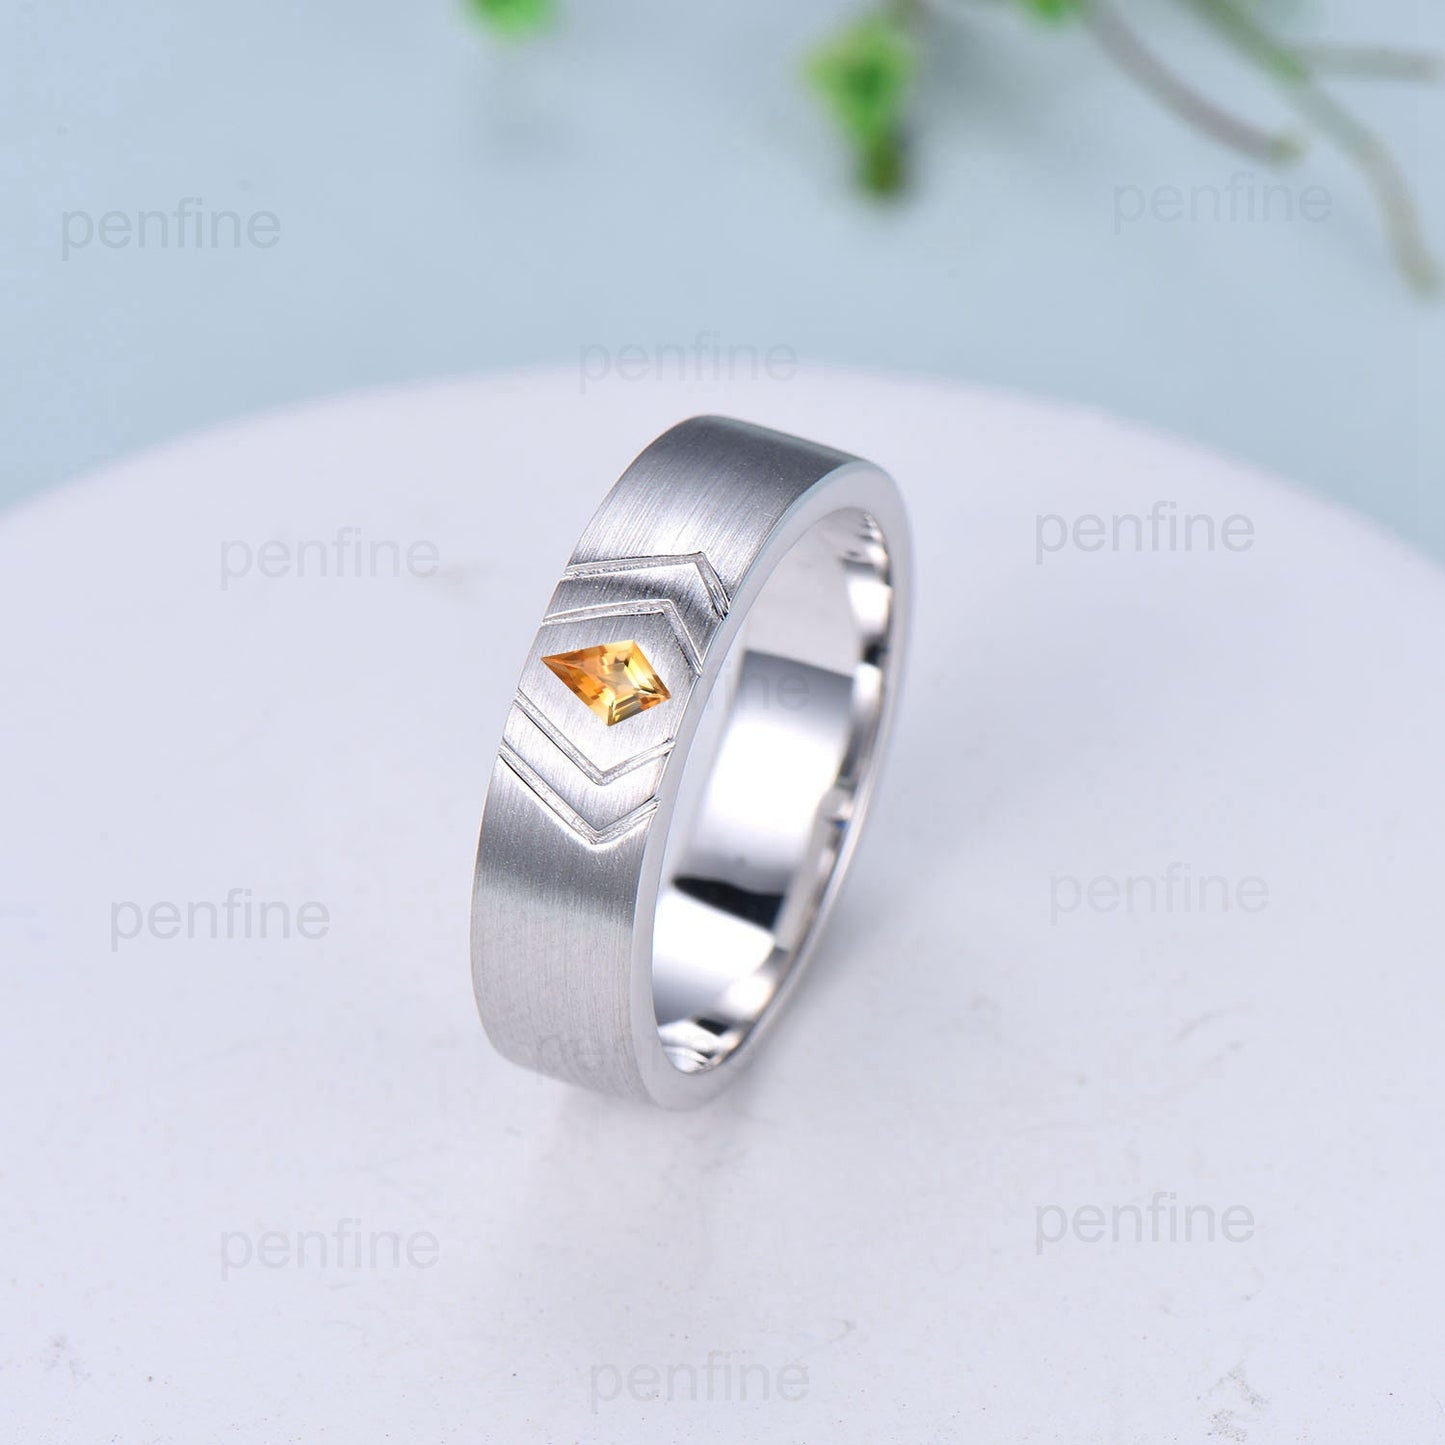 6mm Brushed Finished Men's Wedding Ring Kite Cut Citrine Wedding Band Silver White Gold Howl's Ring Sophie's Ring Matching Band Gift For Men - PENFINE